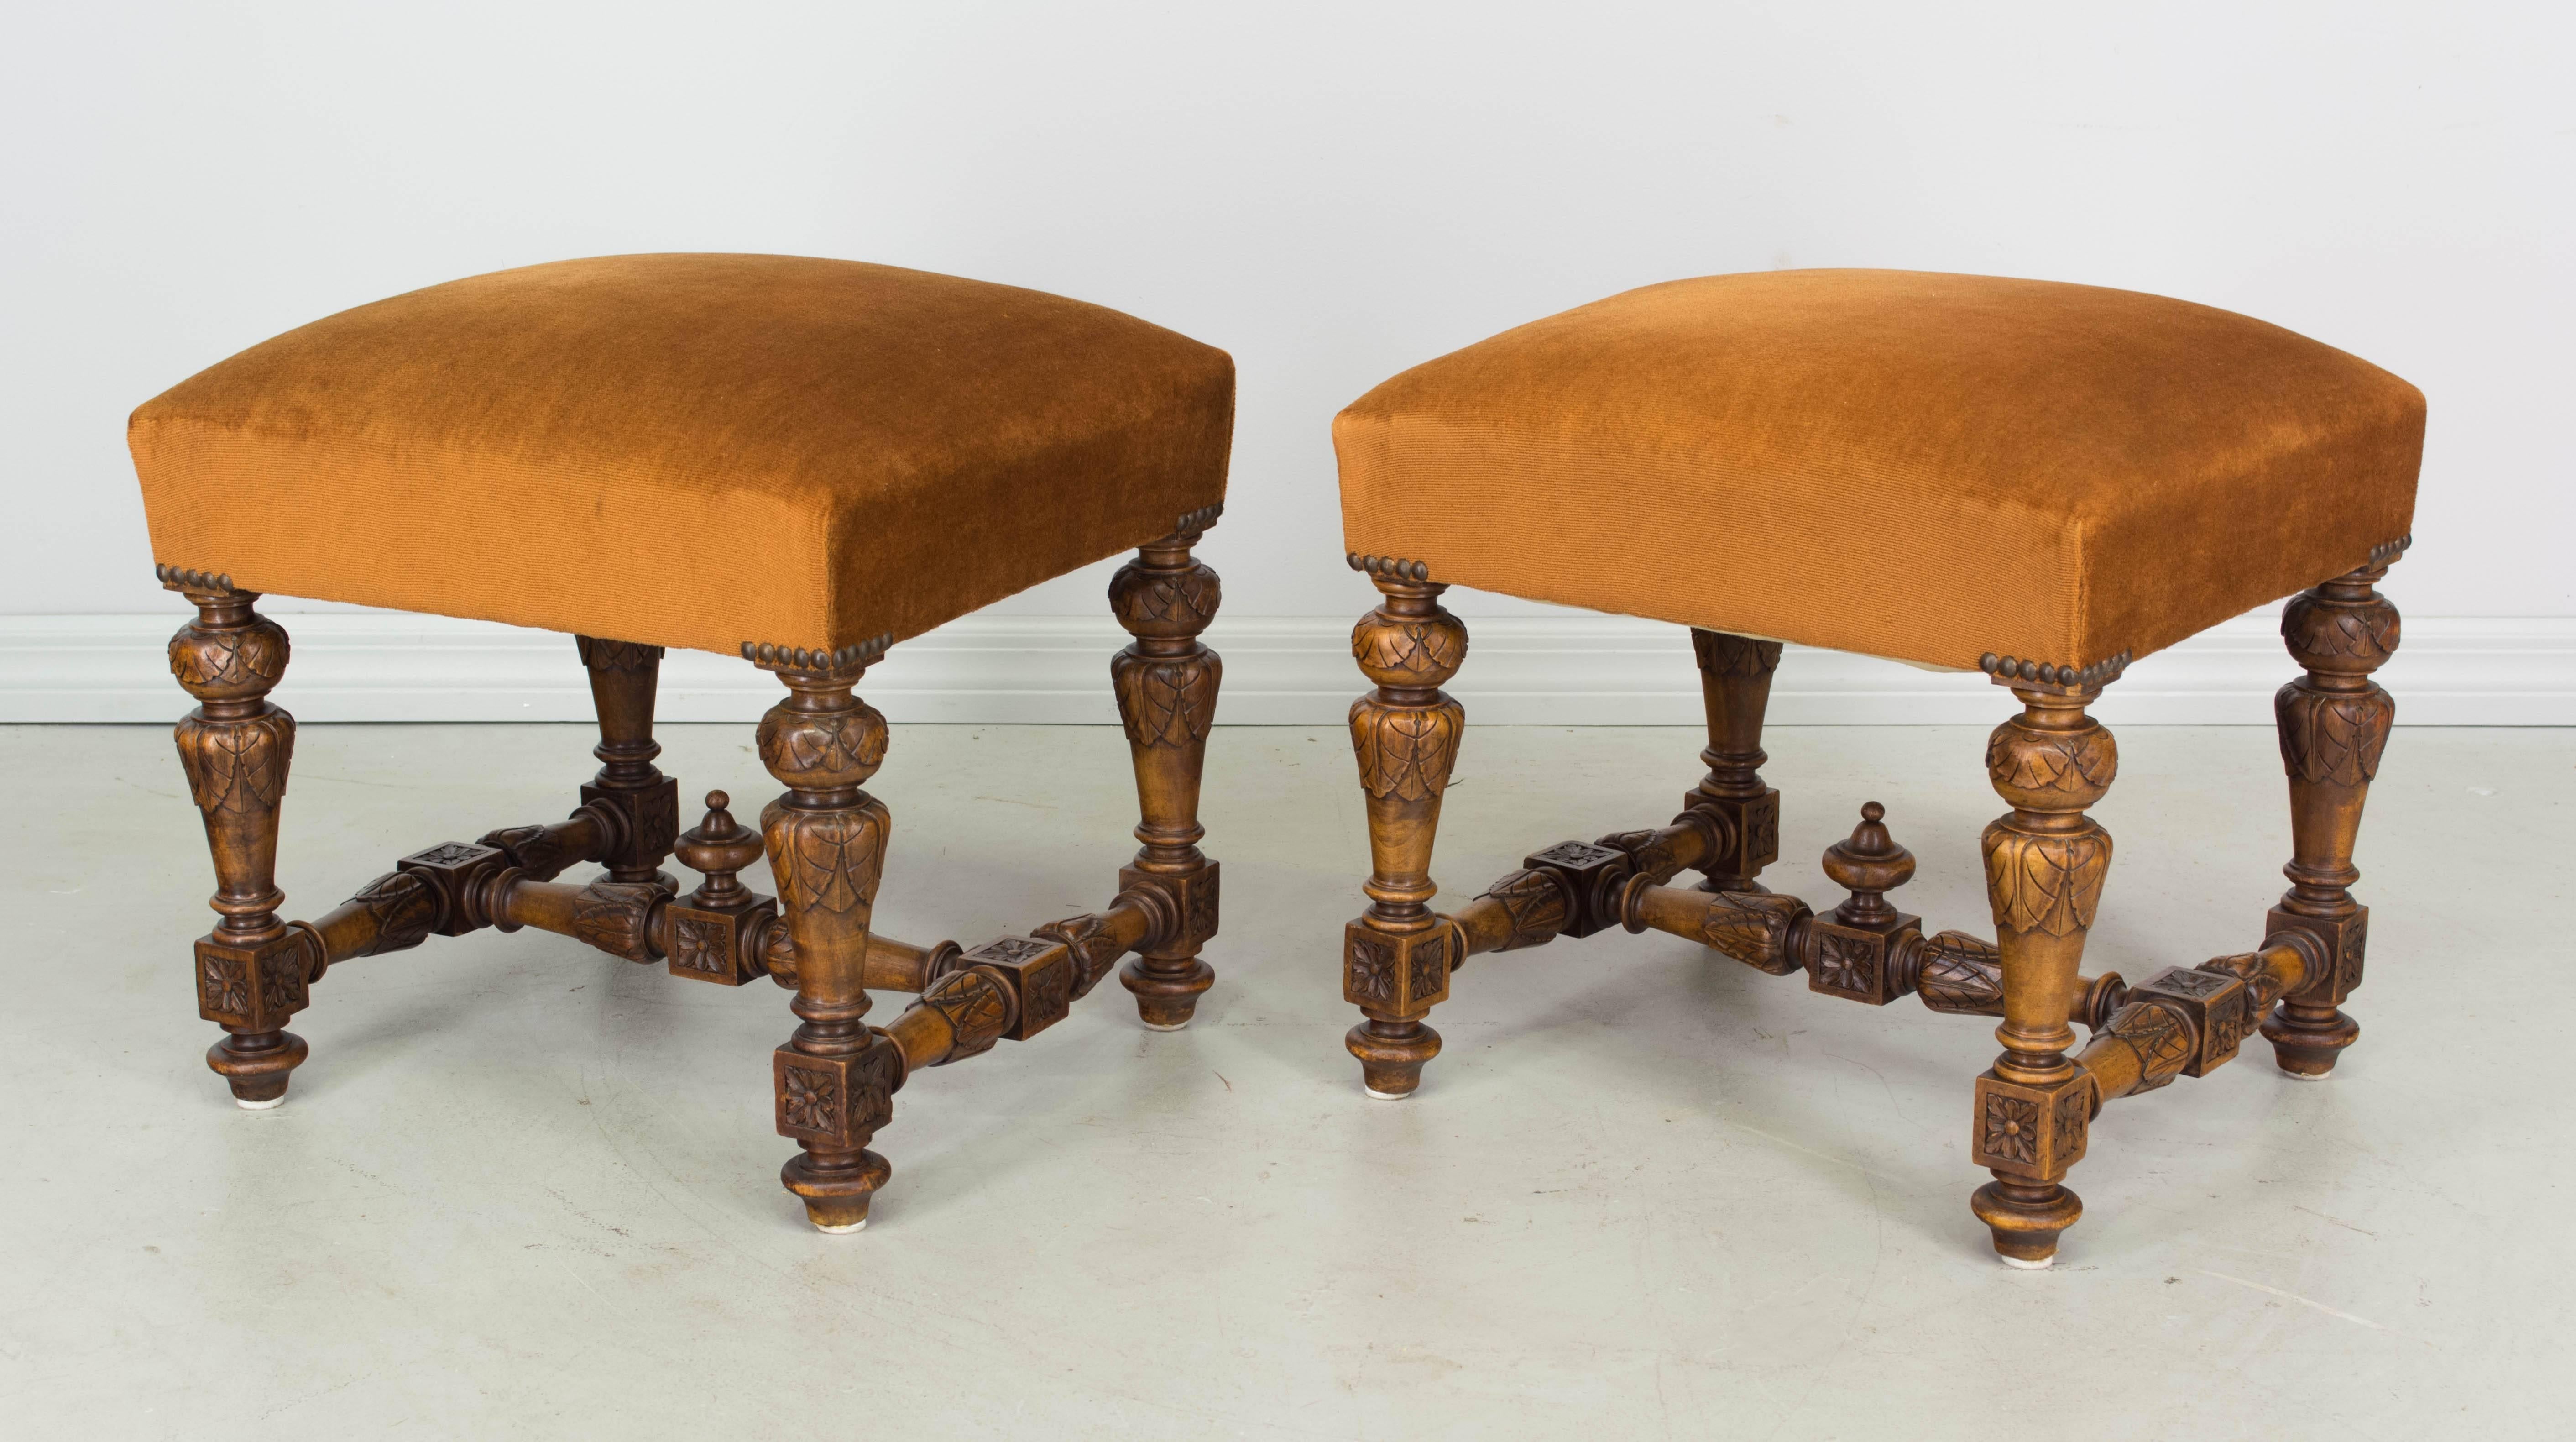 Pair of small French Louis III style stools made of solid walnut. Turned wood legs with carved details and finial in center of stretcher. Very well-made and sturdy. Old velvet upholstery is in serviceable condition.